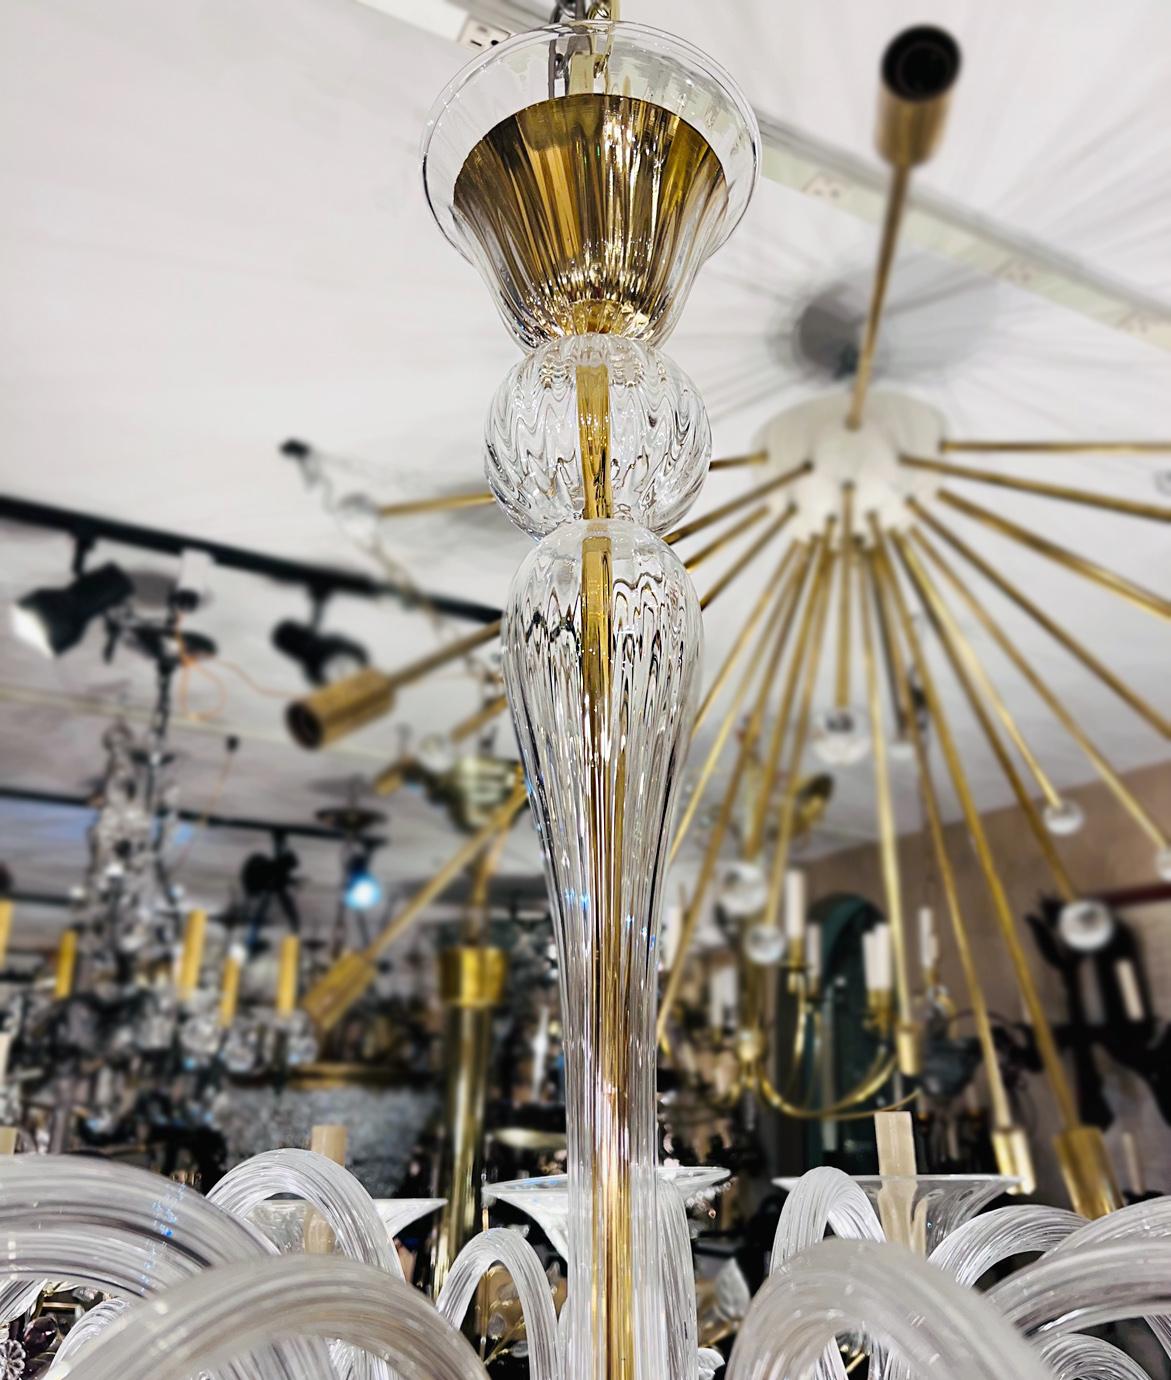 A Pair of circa 1960's Italian clear Murano glass chandeliers with 12 lights. Sold individually.

Measurements:
Diameter: 44